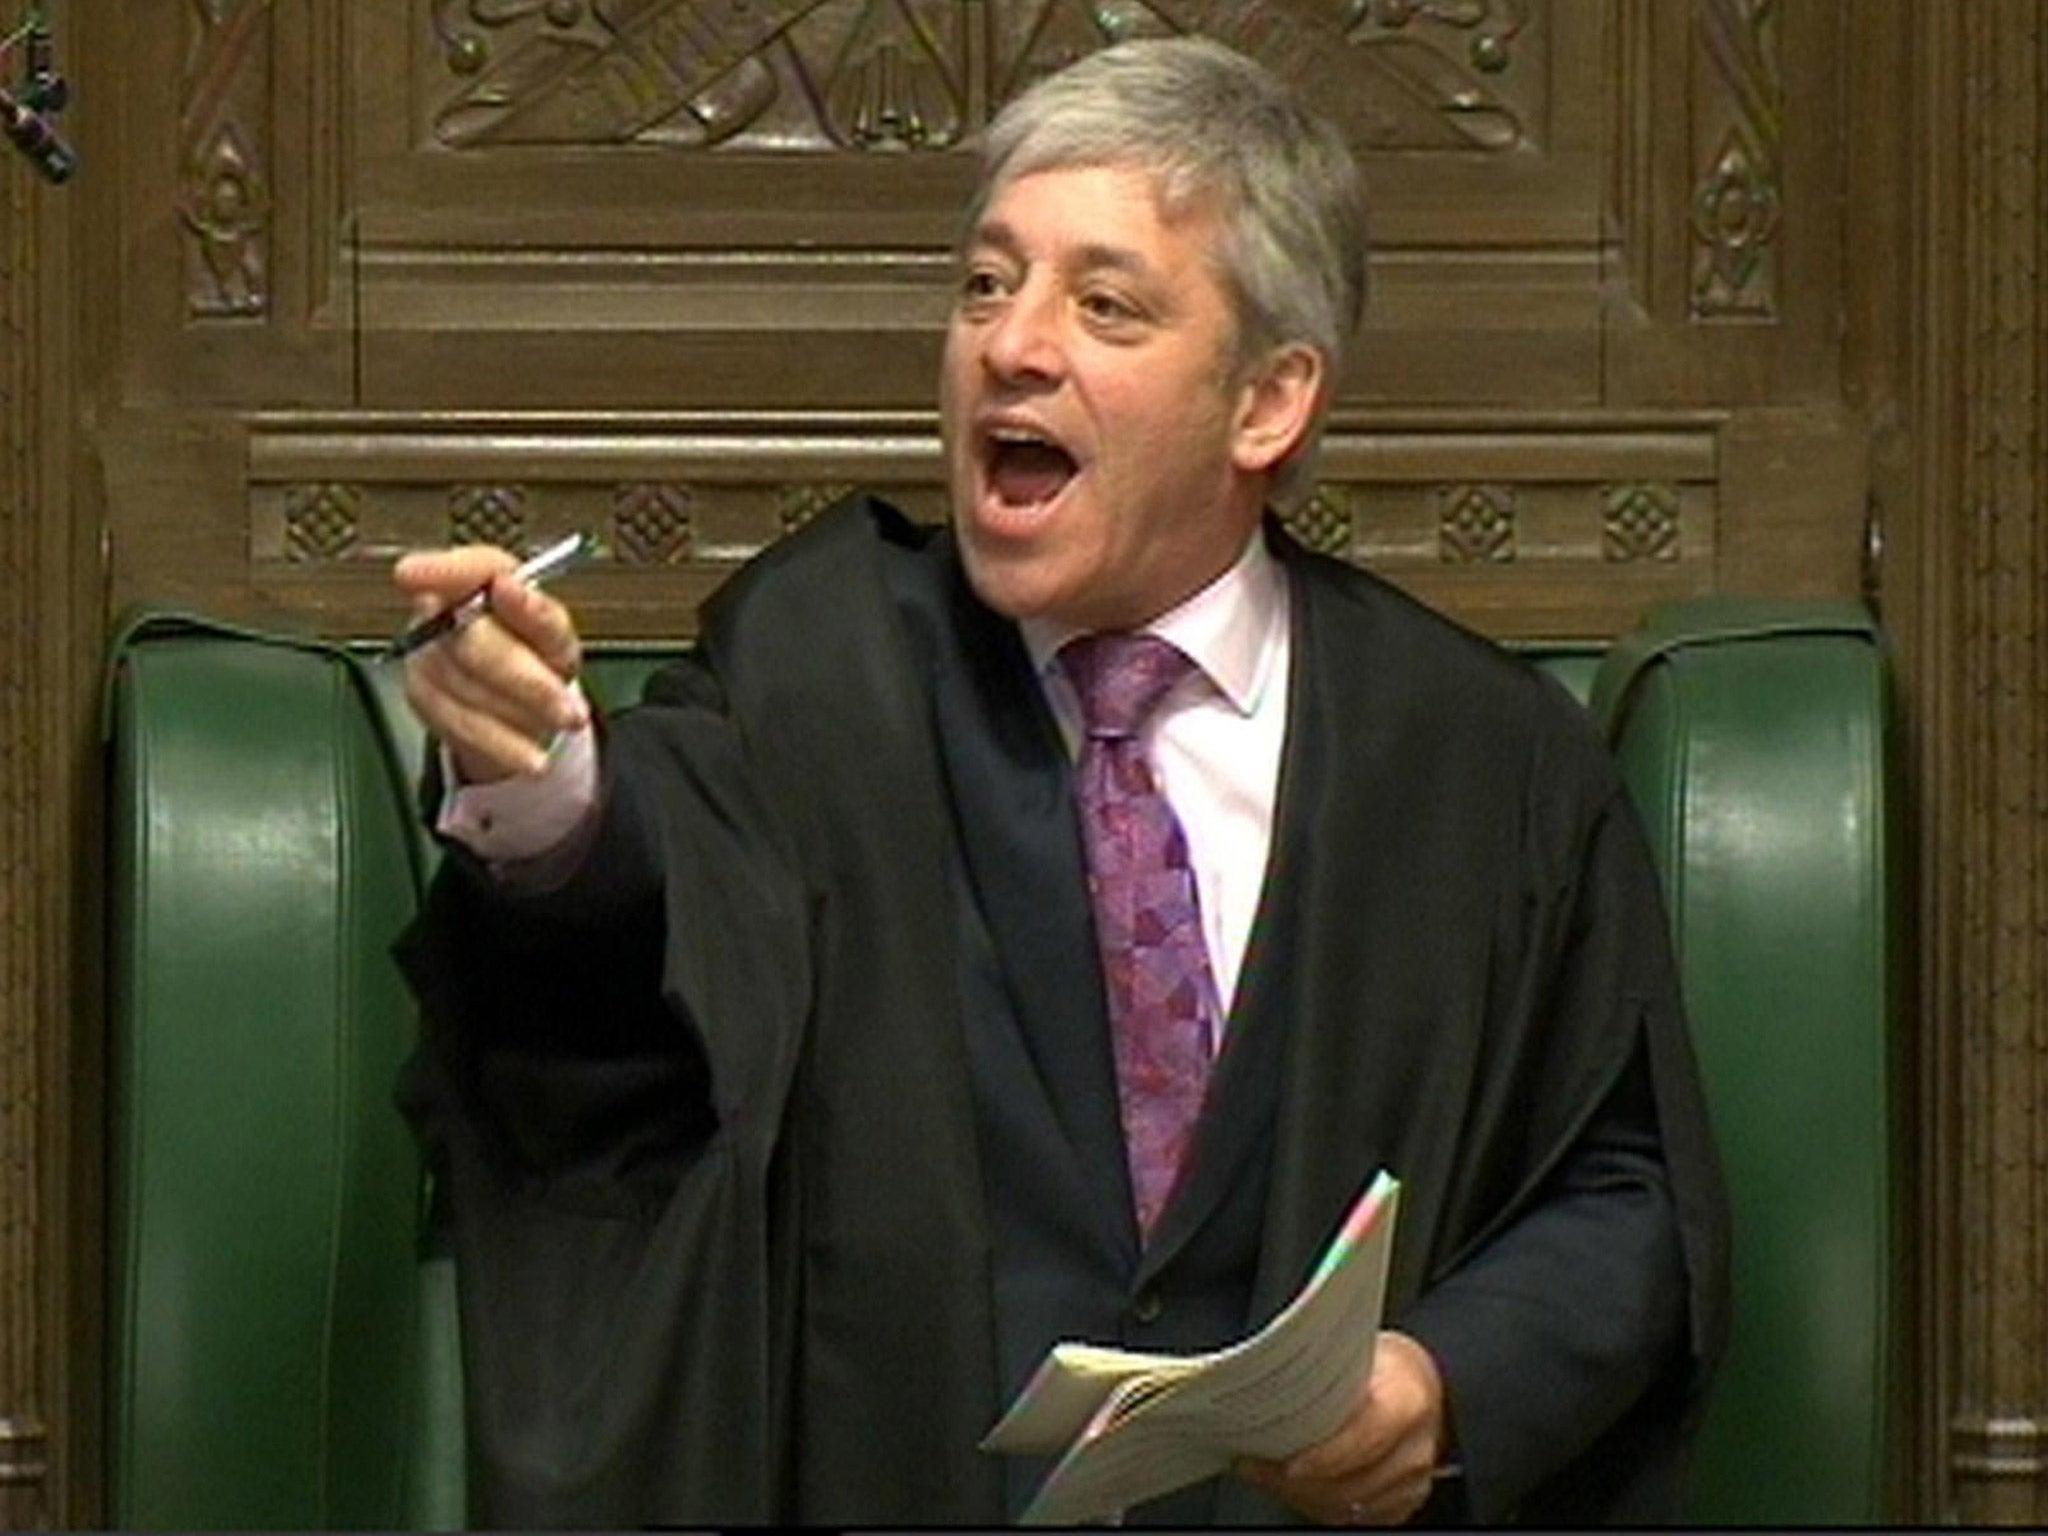 MPs lined up to tell John Bercow to resign